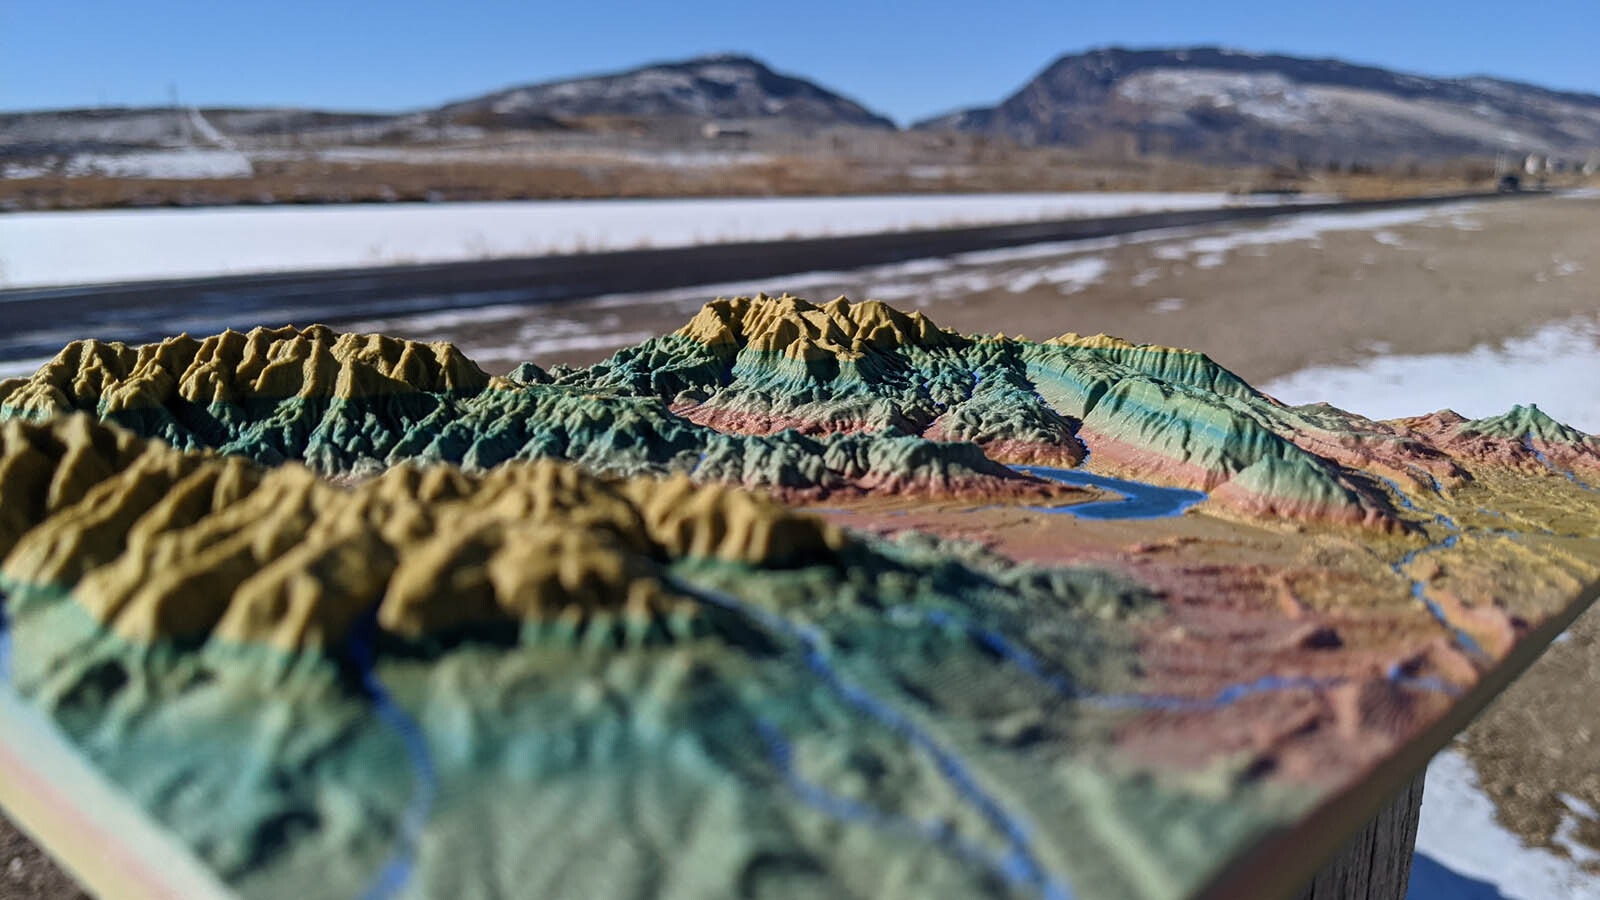 This tiny landscape of a little slice of Wyoming is done in fine and exact detail.